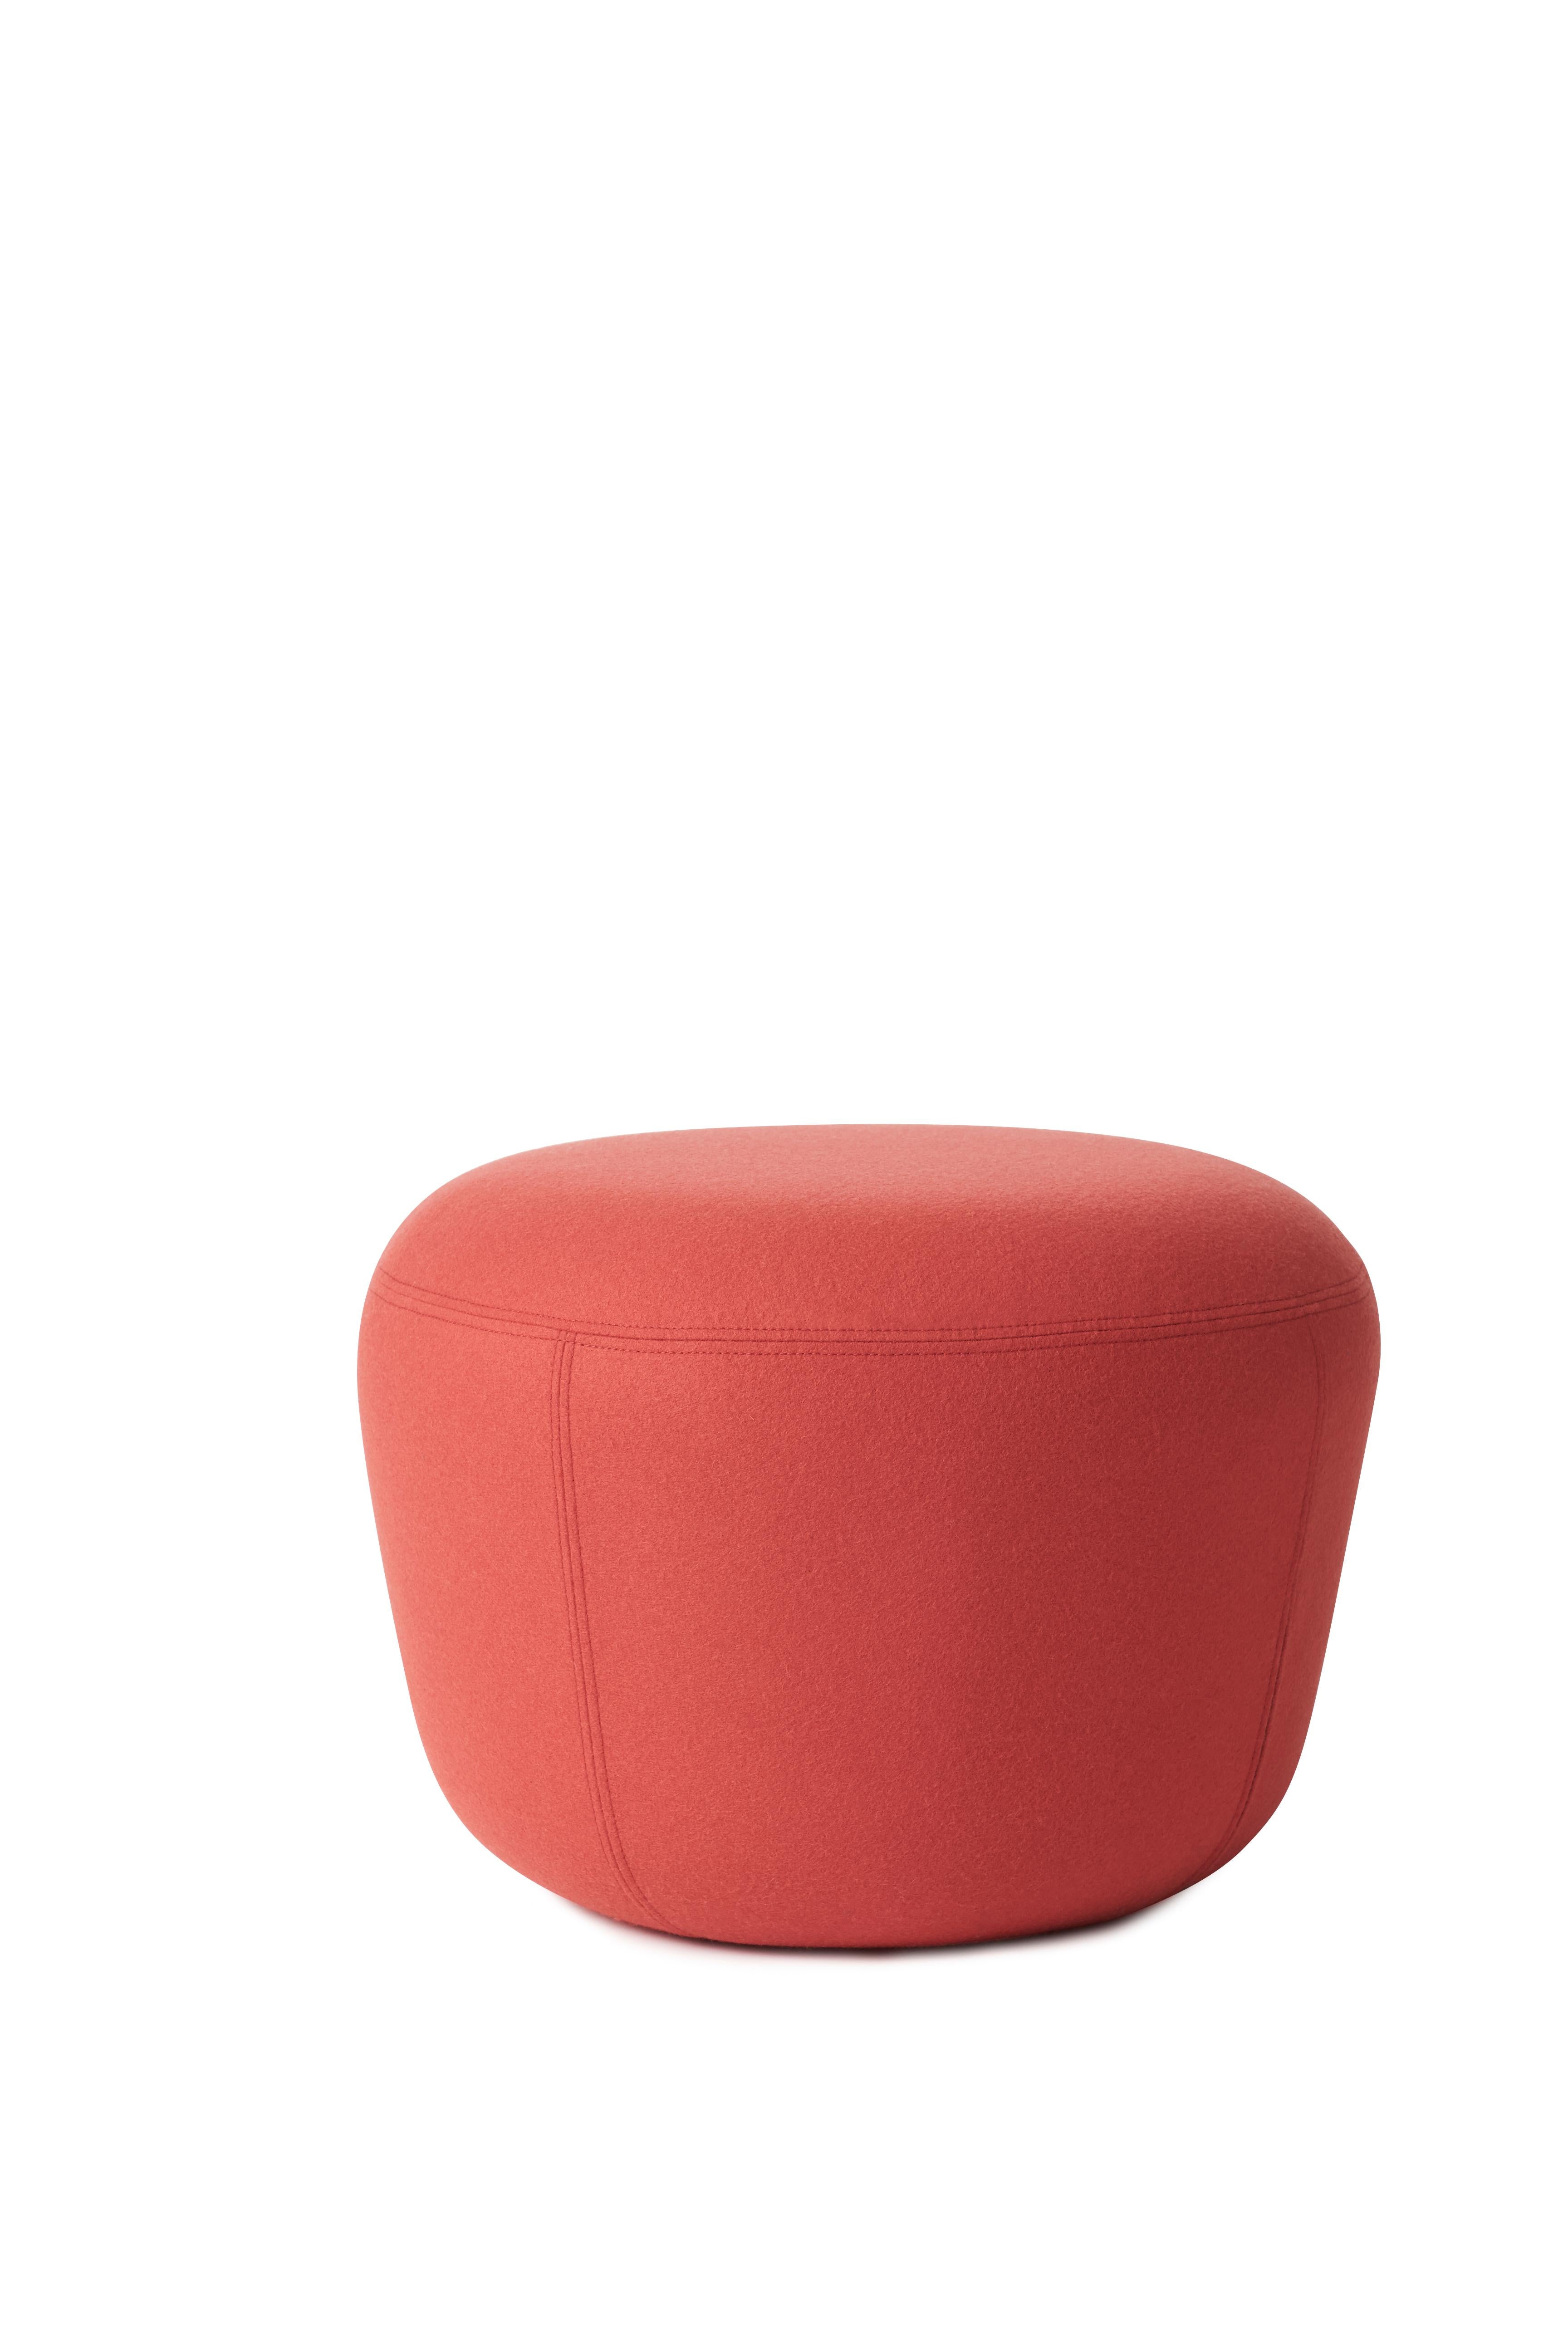 For Sale: Red (Hero 551) Haven Pouf, by Charlotte Høncke from Warm Nordic